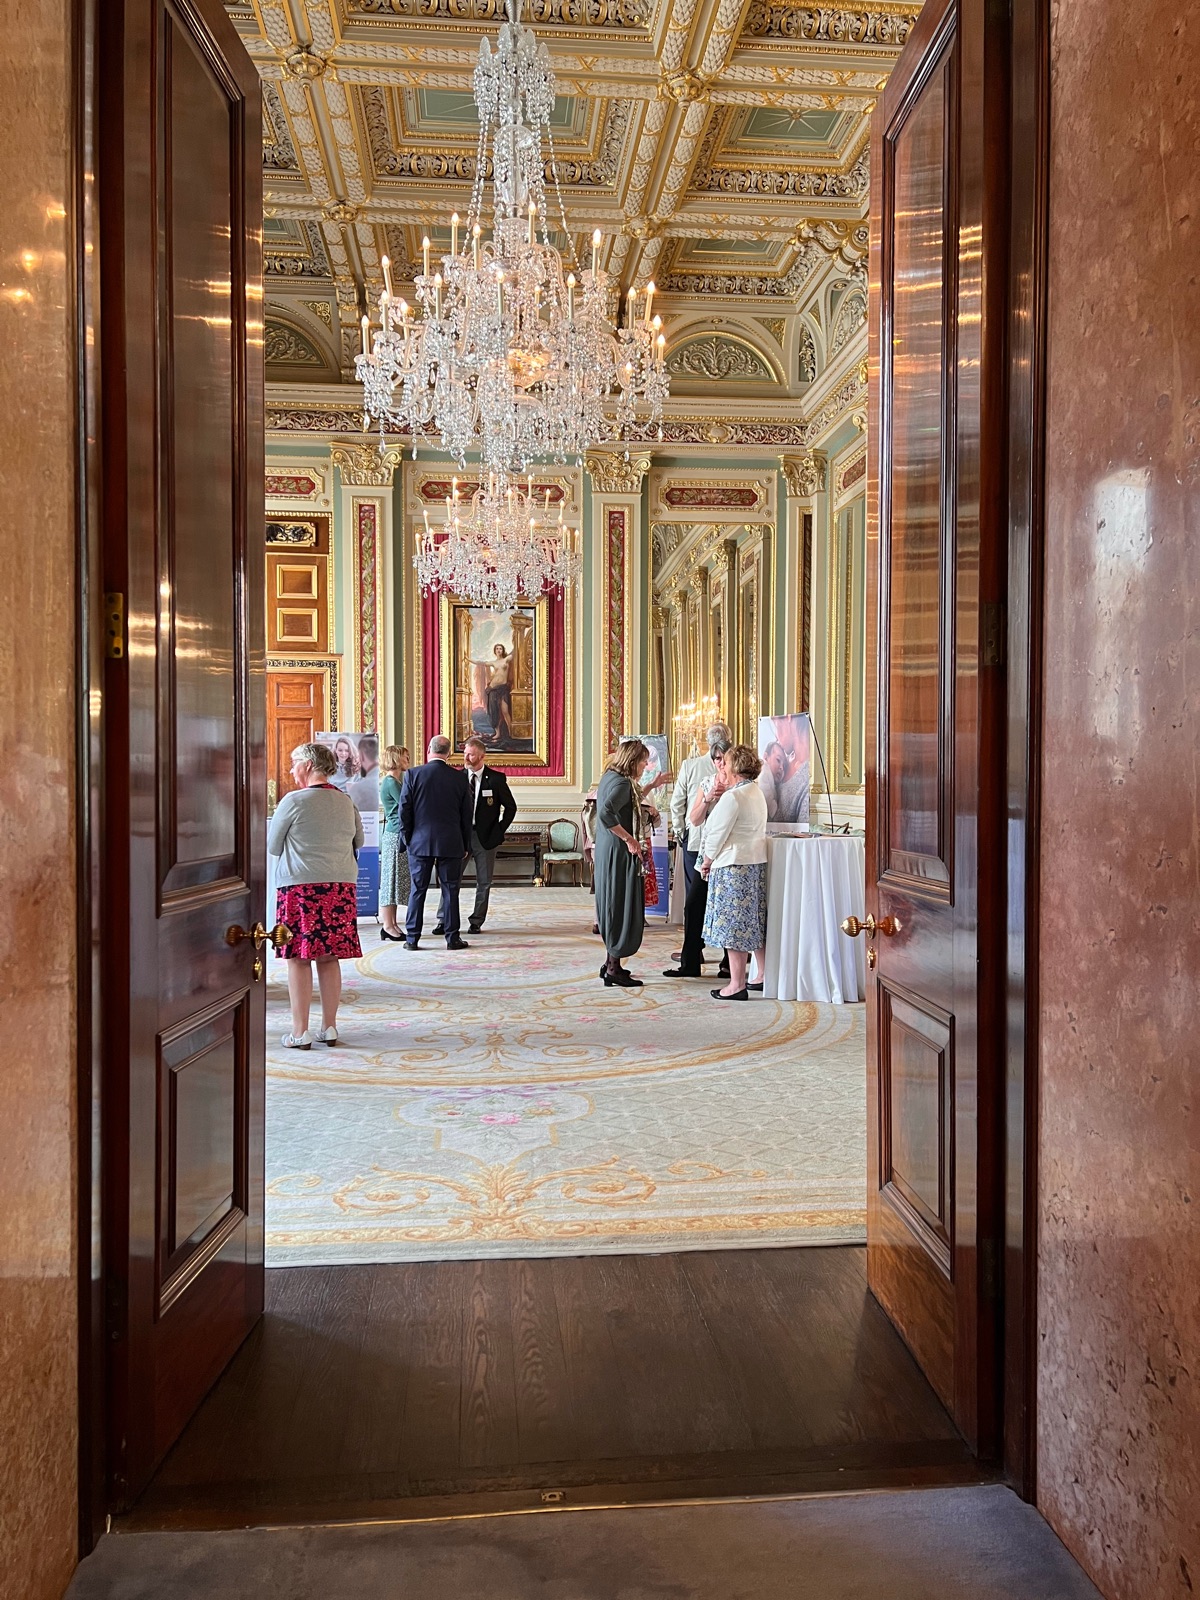 Draper's Hall in London corporate event - view through a doorway